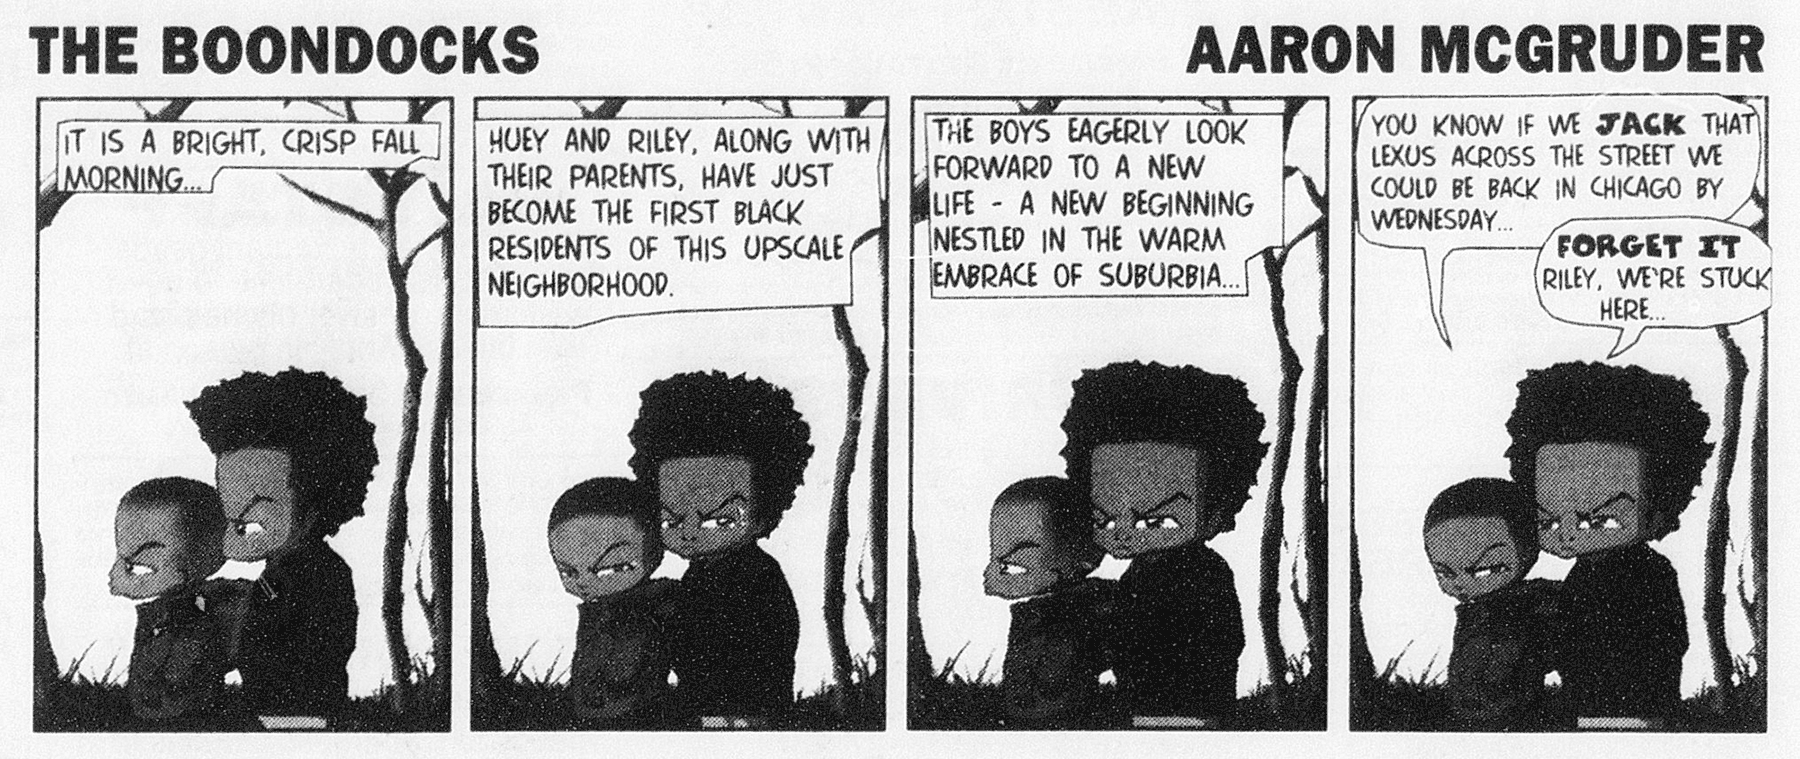 The Boondocks strip by Aaron McGruder: "It is a bright, crisp fall morning ... Huey and Riley, along with their parents, have just become the first black residents of this upscale neighborhood. The boys eagerly look forward to a new life—a new beginning nestled in the warm embrace of suburbia ... 'You know if we jack that Lexus across the street we could be back in Chicago by Wednesday ...' 'Forget it Riley, we're stuck here...'"